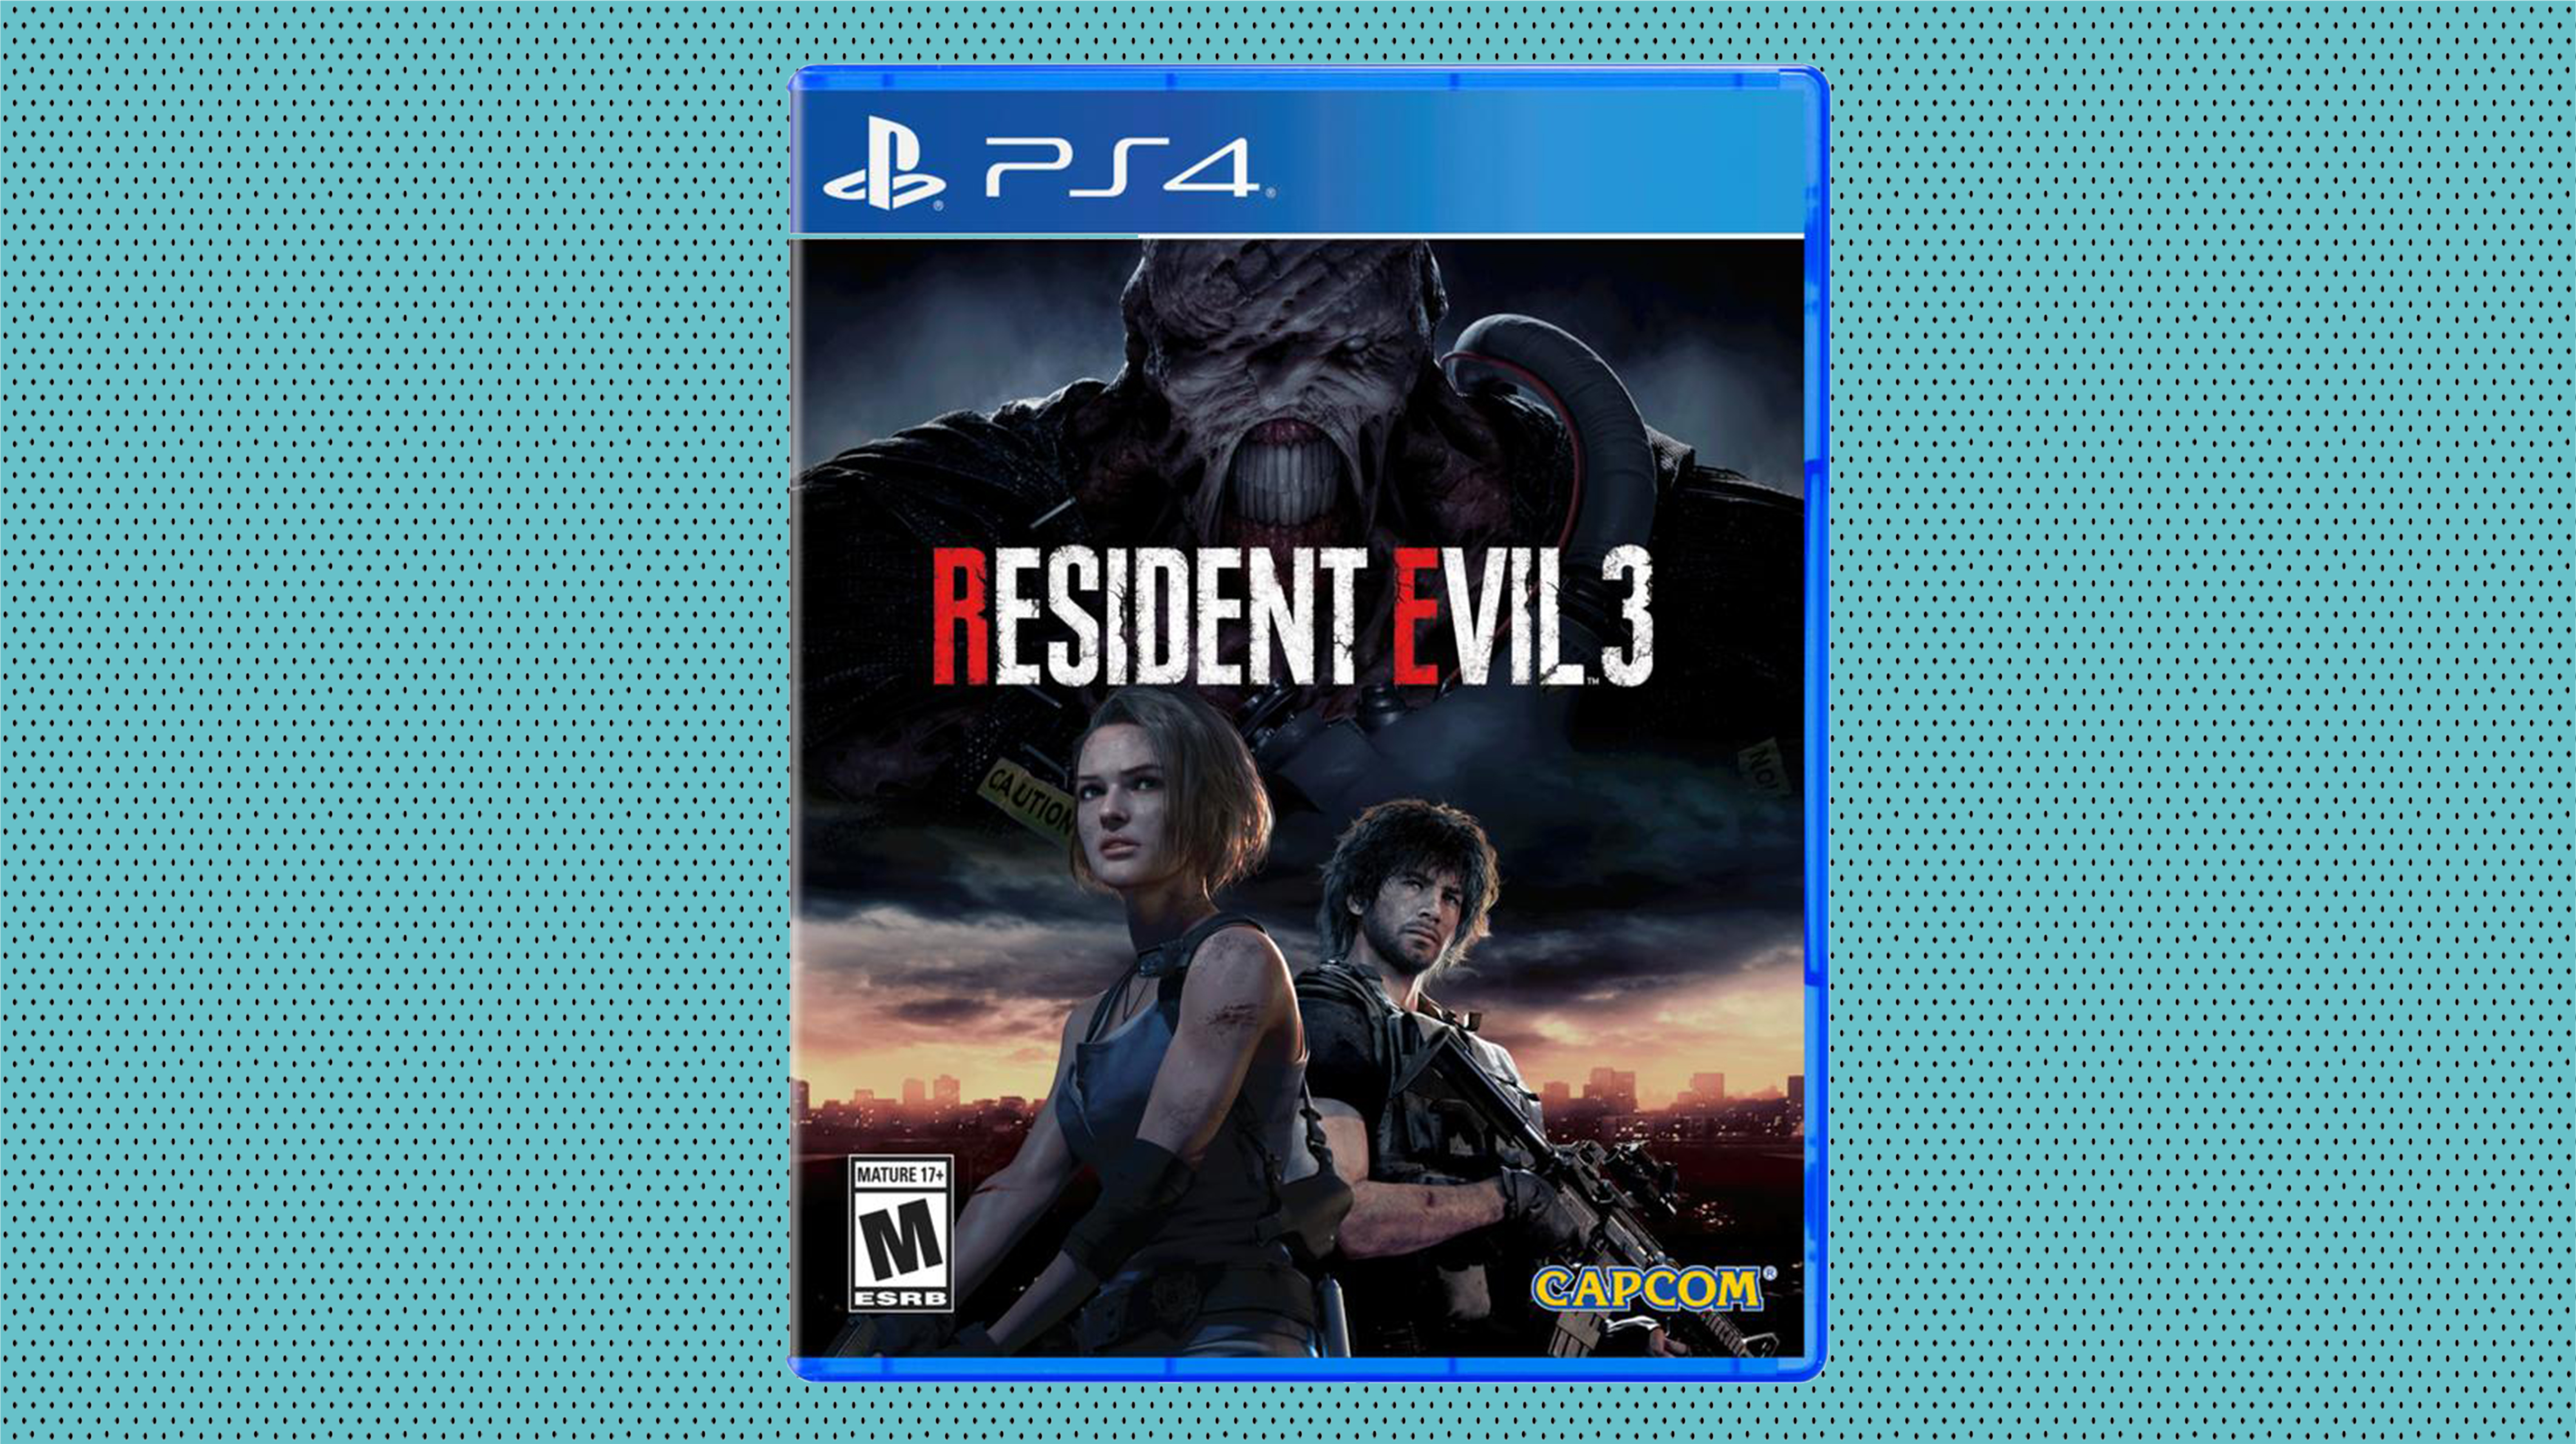 resident evil 3 ps4 used